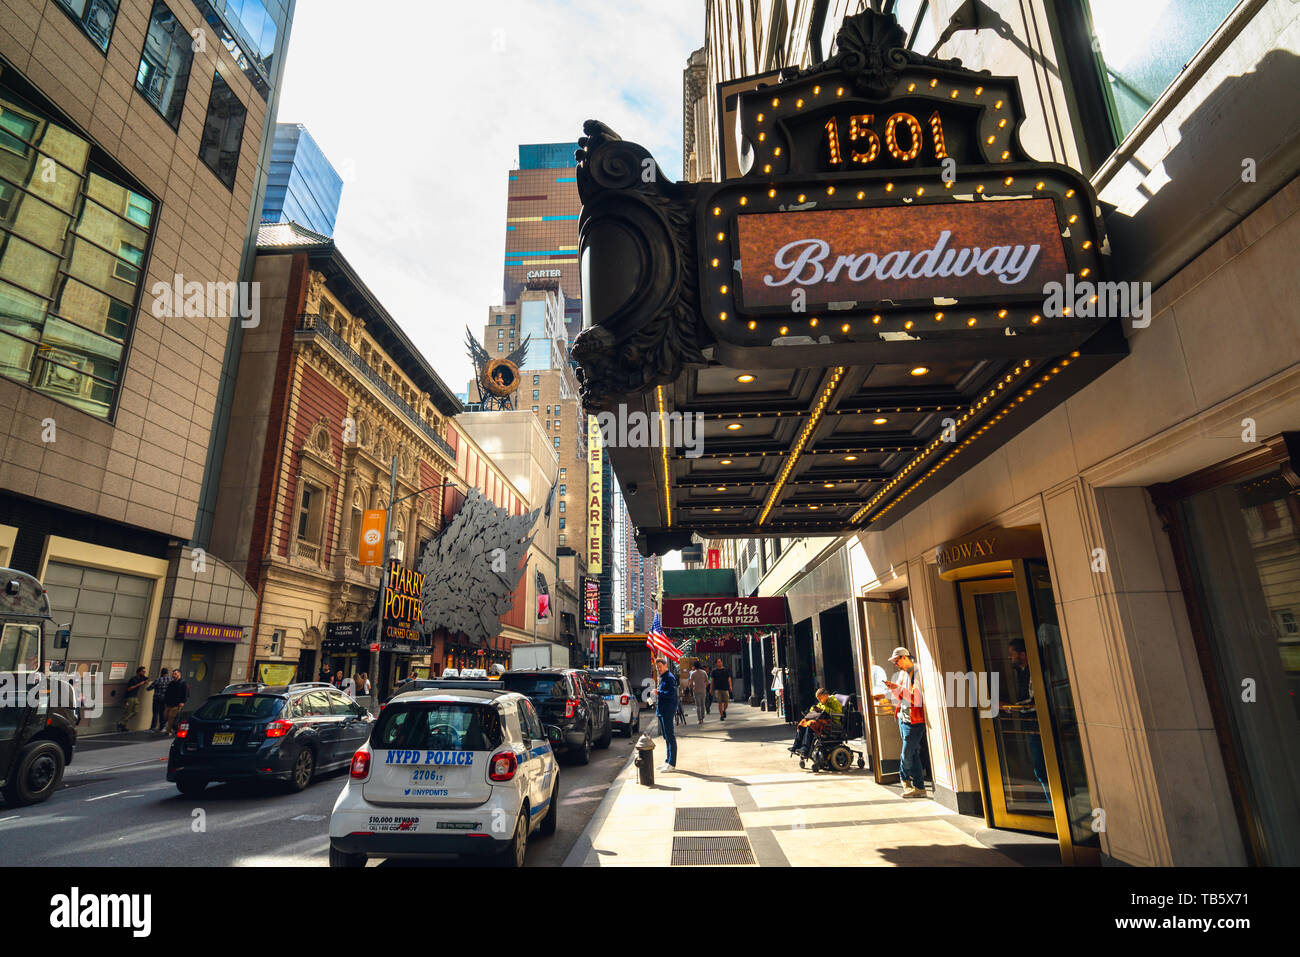 Paramount Building, 1501 Broadway, located between West 43rd and 44th Streets in the Times Square, New York City, May 24, 2019 Stock Photo